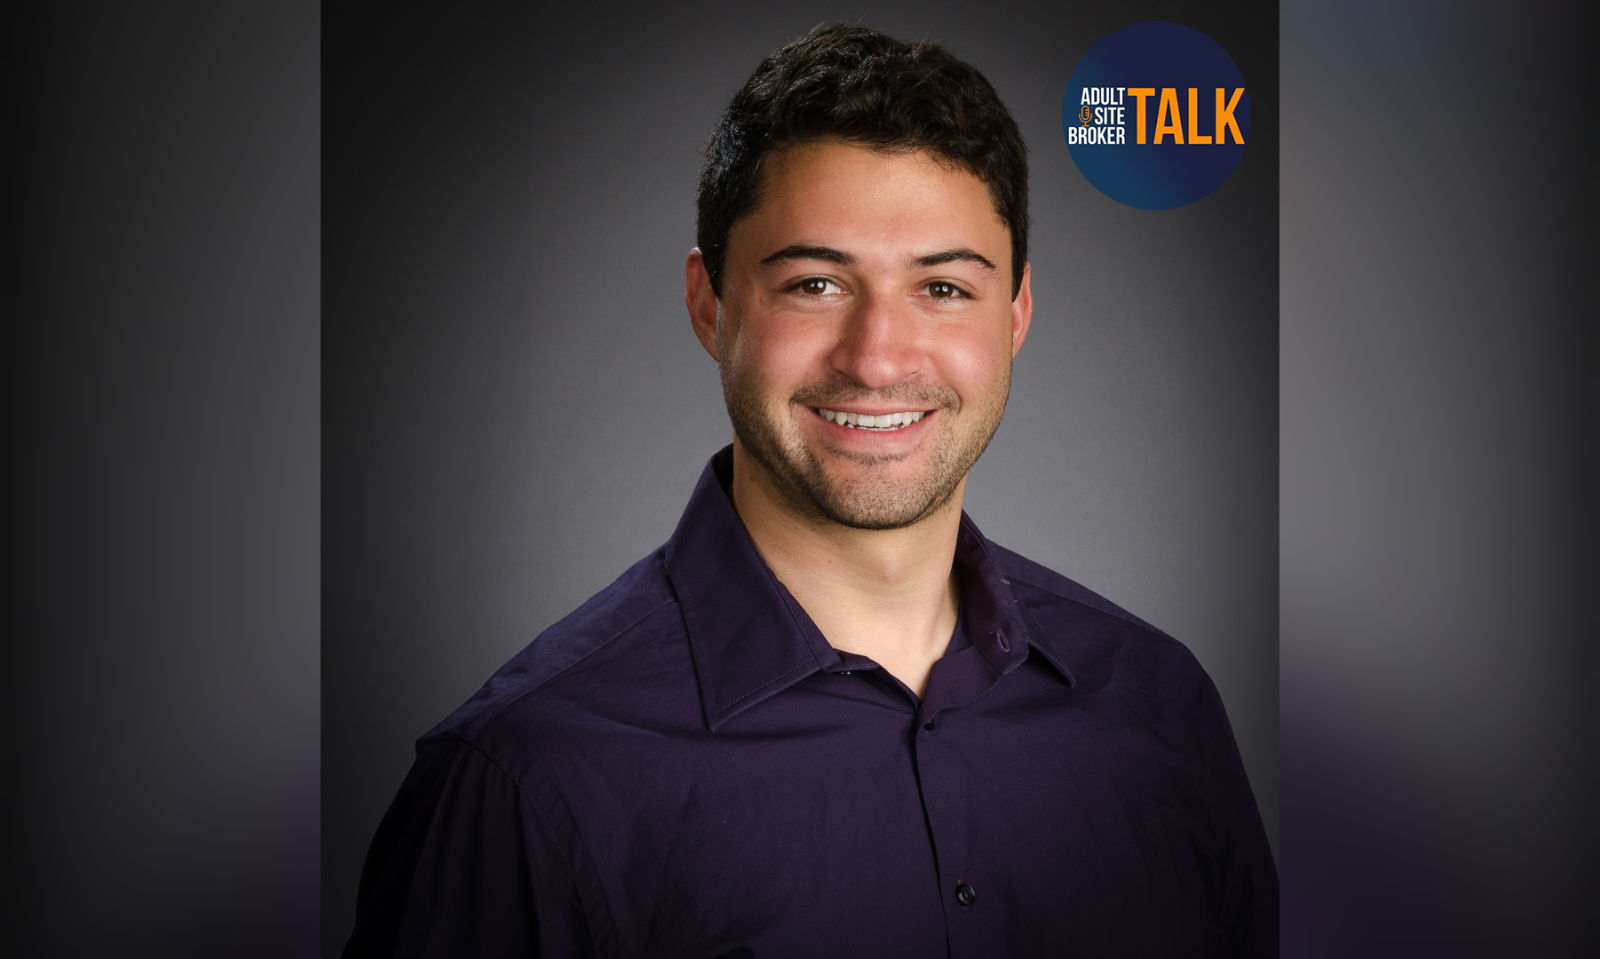 Alex Georges Is This Week's Guest on 'Adult Site Broker Talk'